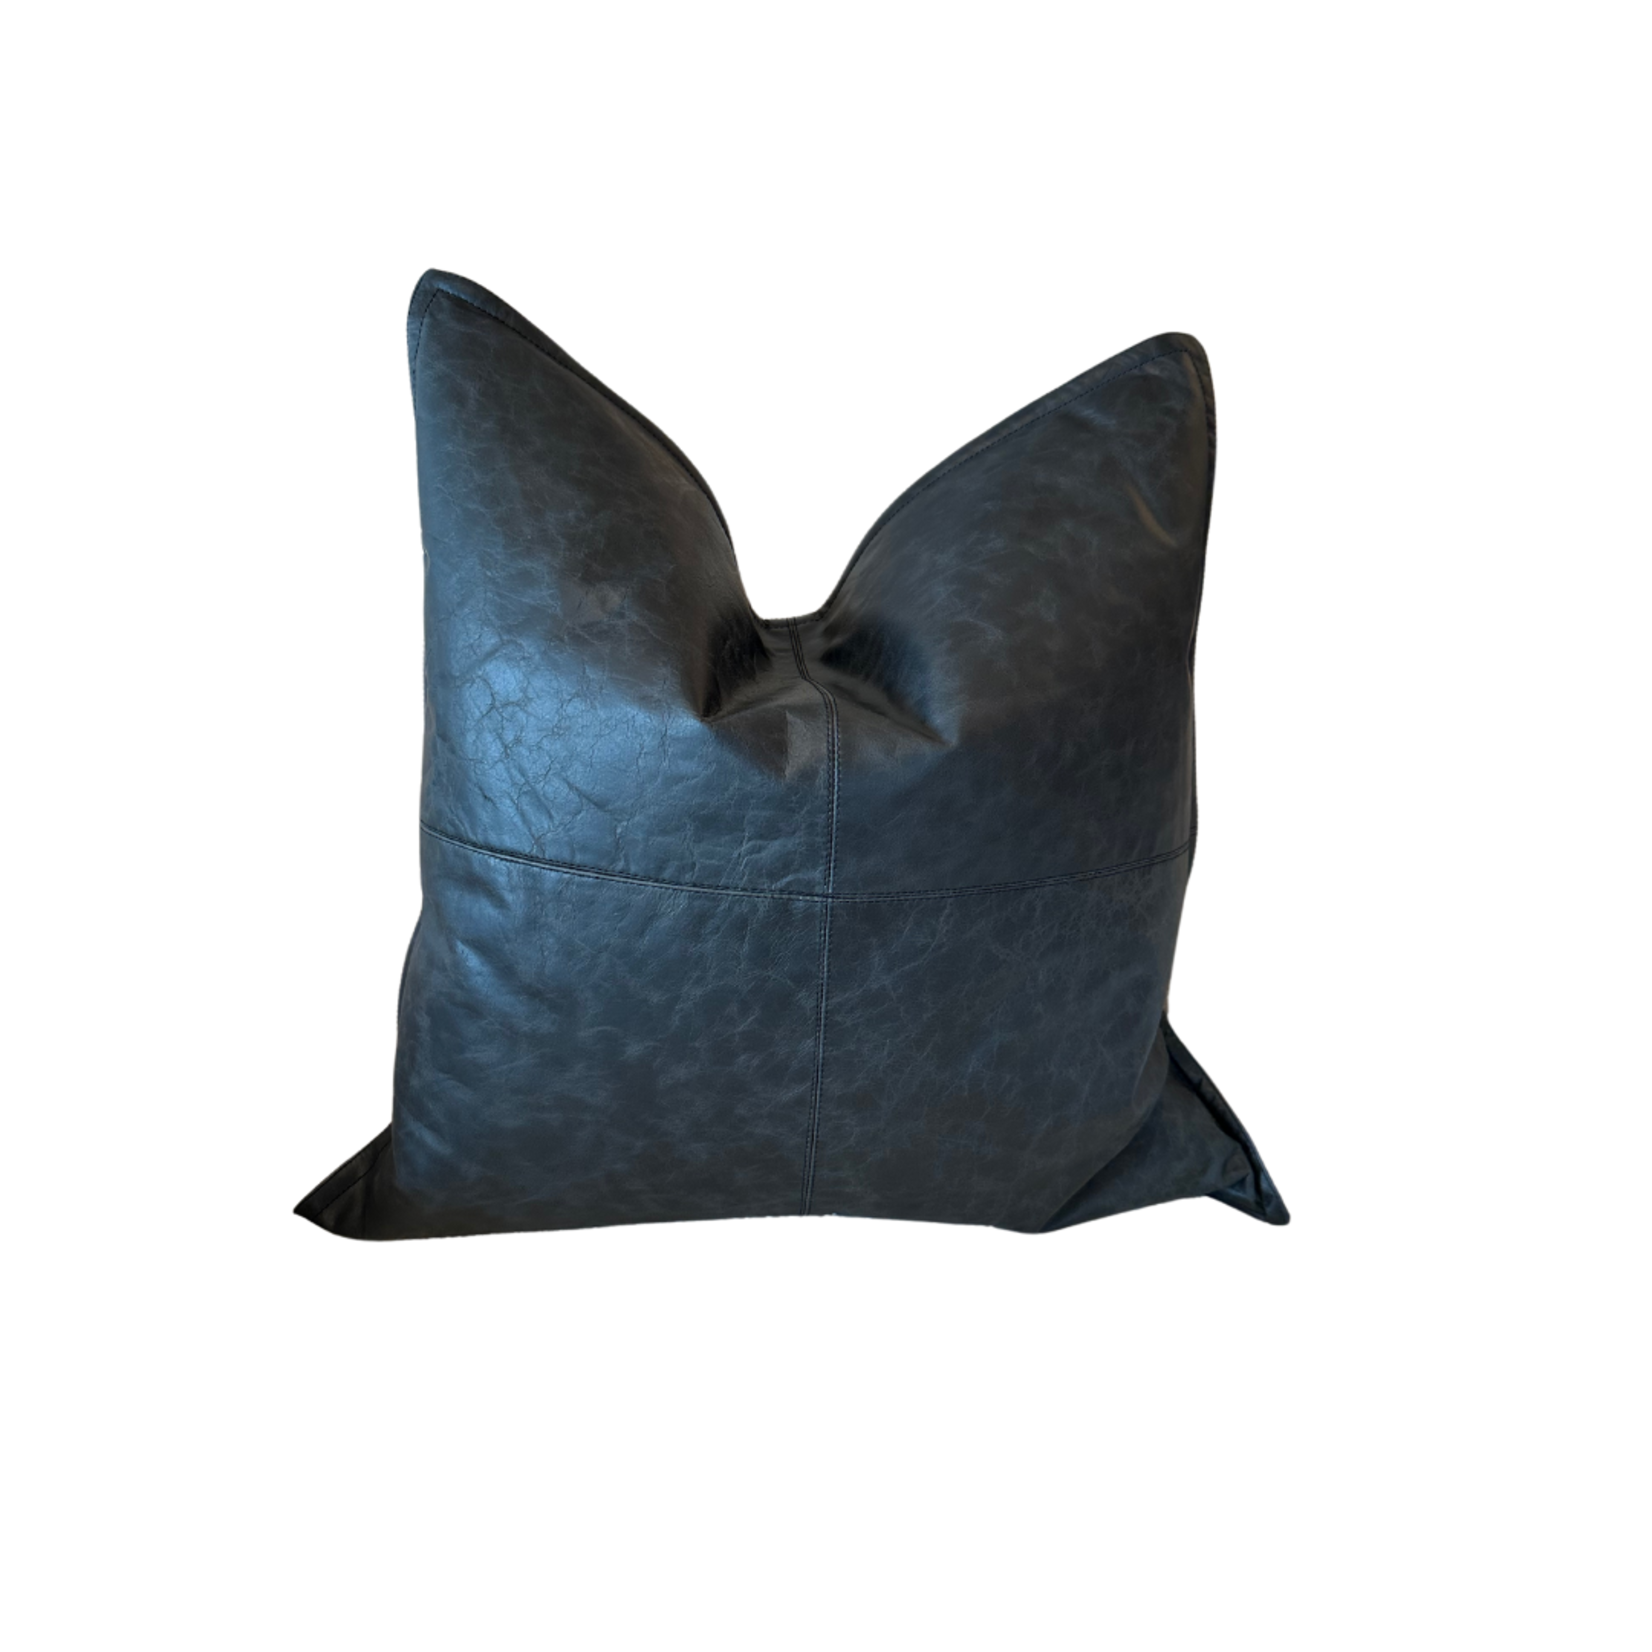 CLASSIC HOME LEATHER DEXTER ONYX 22" PILLOW